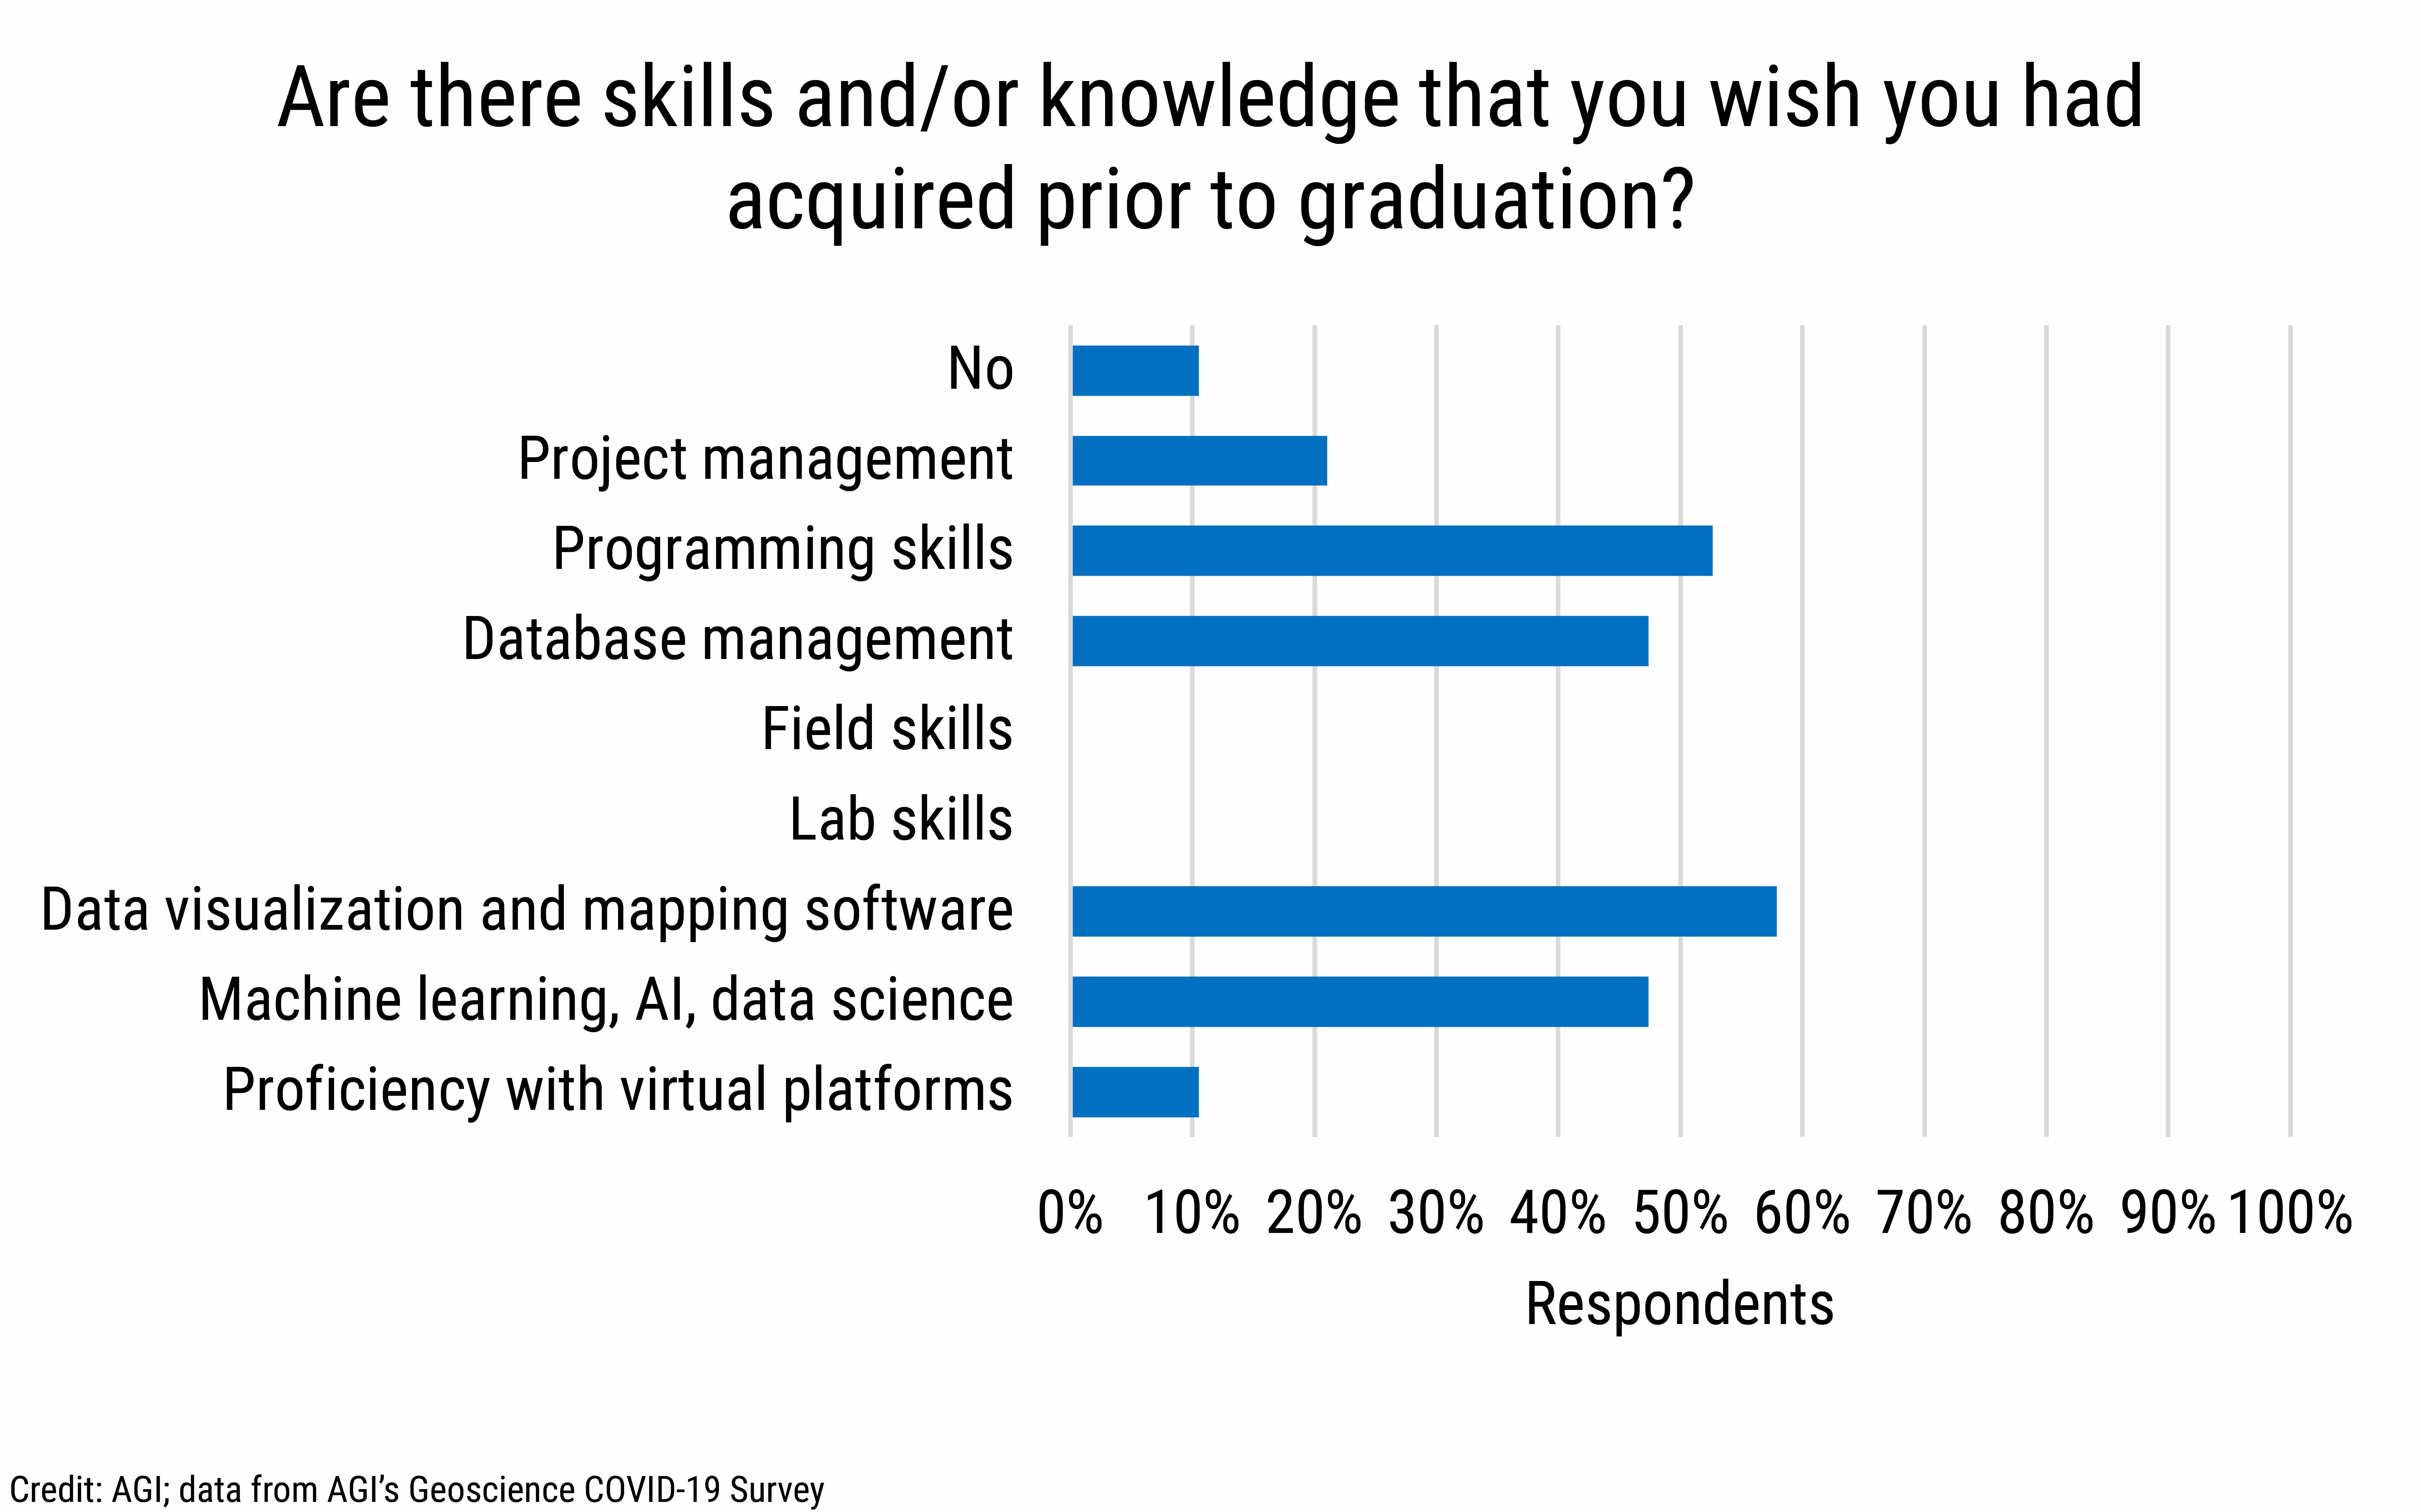 DB_2021-026 chart 03: Are there skills and/or knowledge that you wish you had acquired prior to graduation? (Credit: AGI; data from AGI's Geoscience COVID-19 Survey)